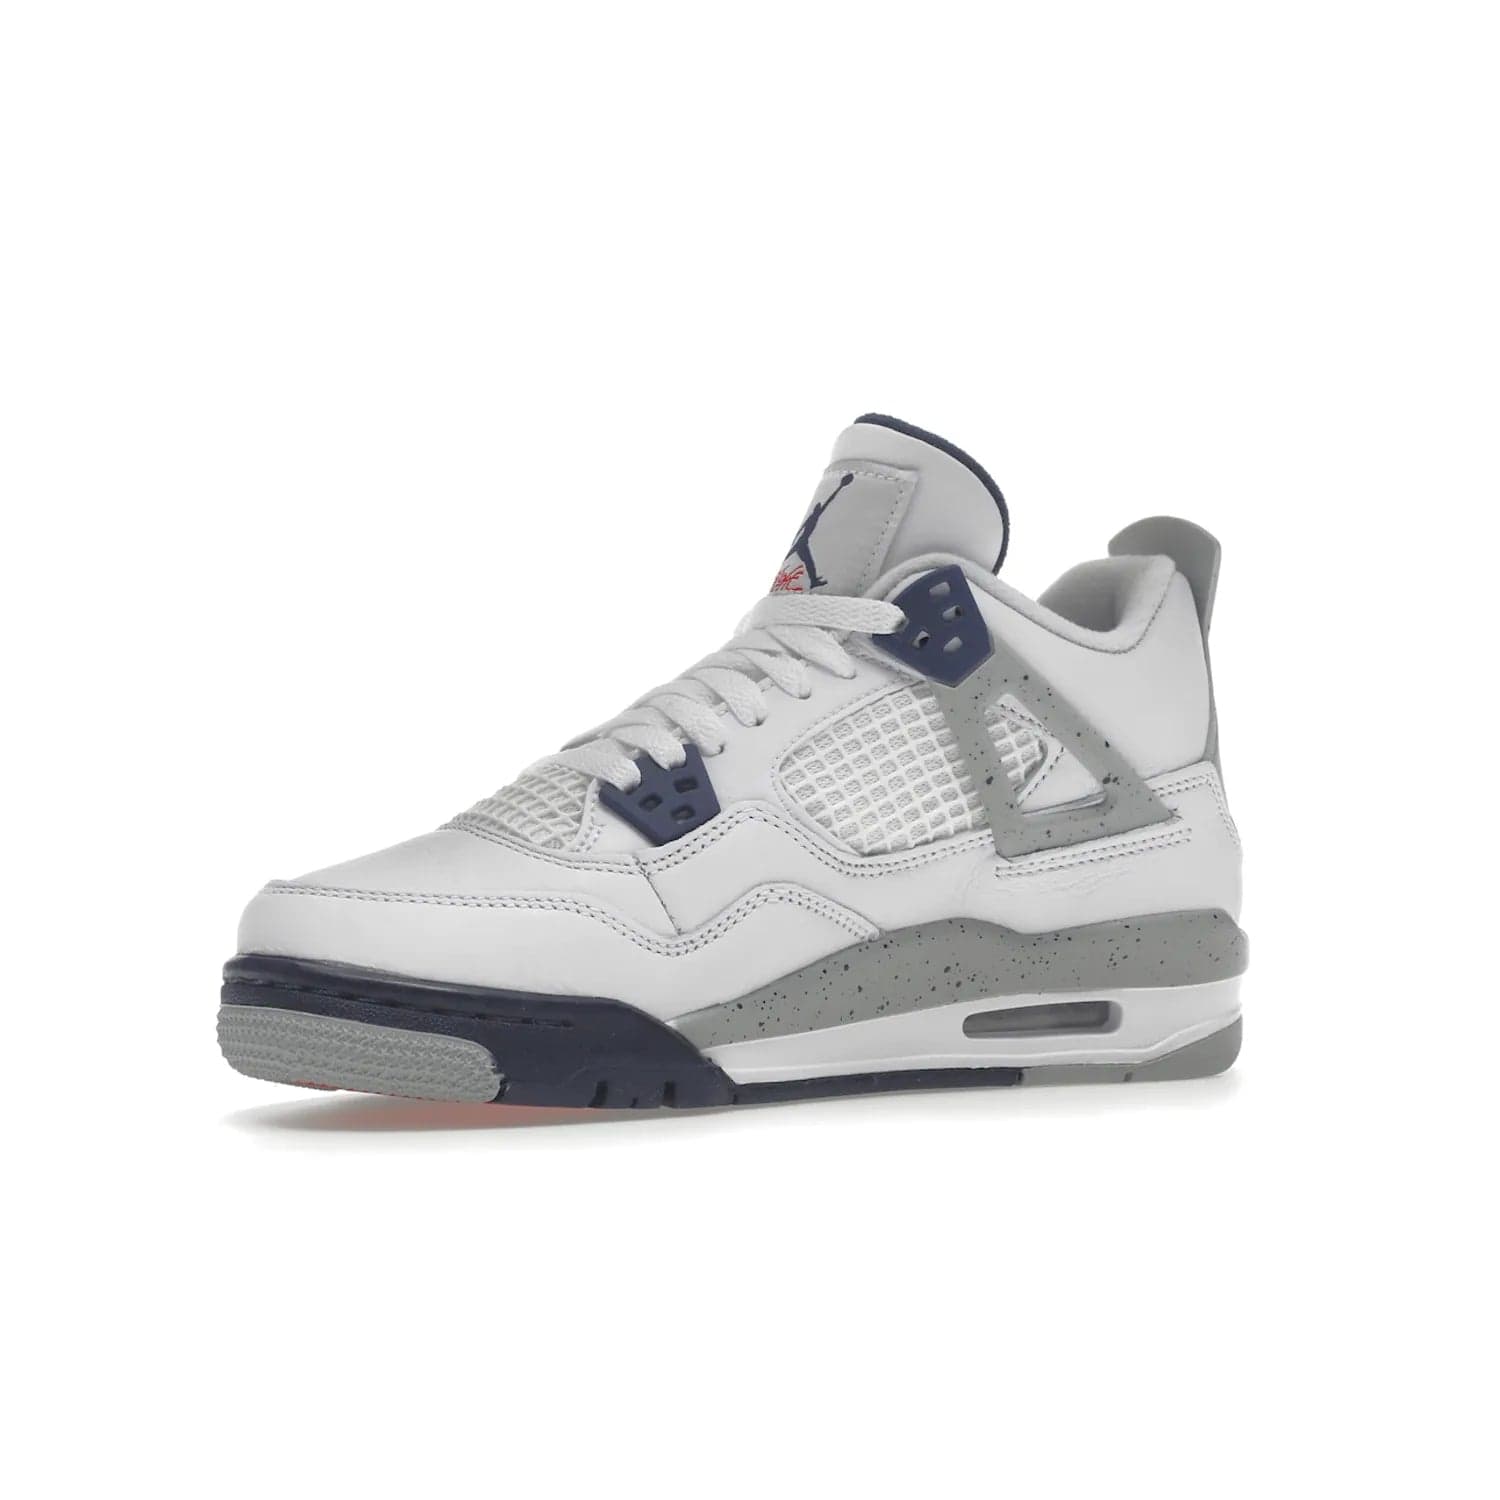 Jordan 4 Retro Midnight Navy (GS) - Image 16 - Only at www.BallersClubKickz.com - Shop the Air Jordan 4 Retro Midnight Navy GS. The white leather upper features black support wings & heel tab, navy eyelets & woven tongue tag with Jumpman logos. The midsole features two-tone polyurethane insole & AIR units in the heel & forefoot. Get the white/midnight navy/light smoke grey/fire colorway & show off your style.